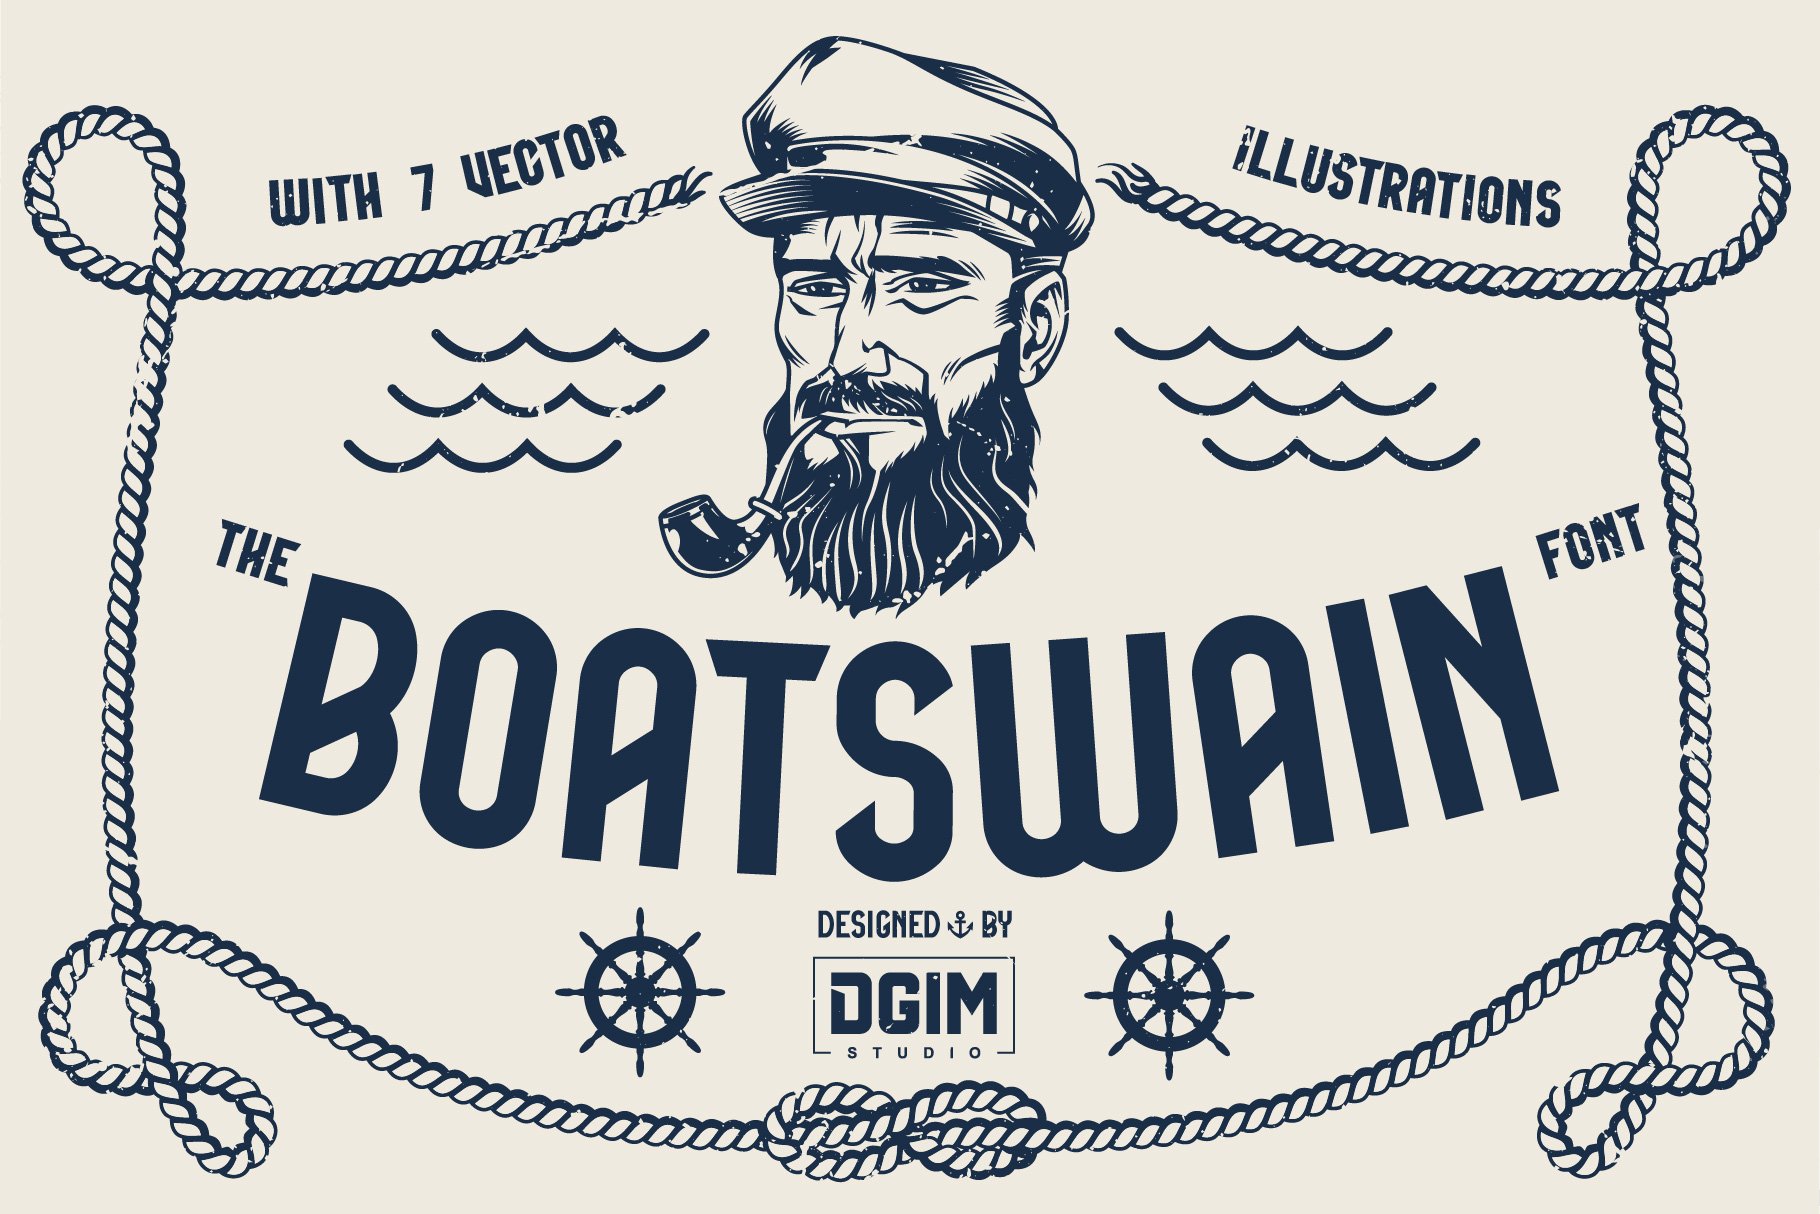 Boatswain Fonts Family + Extras cover image.